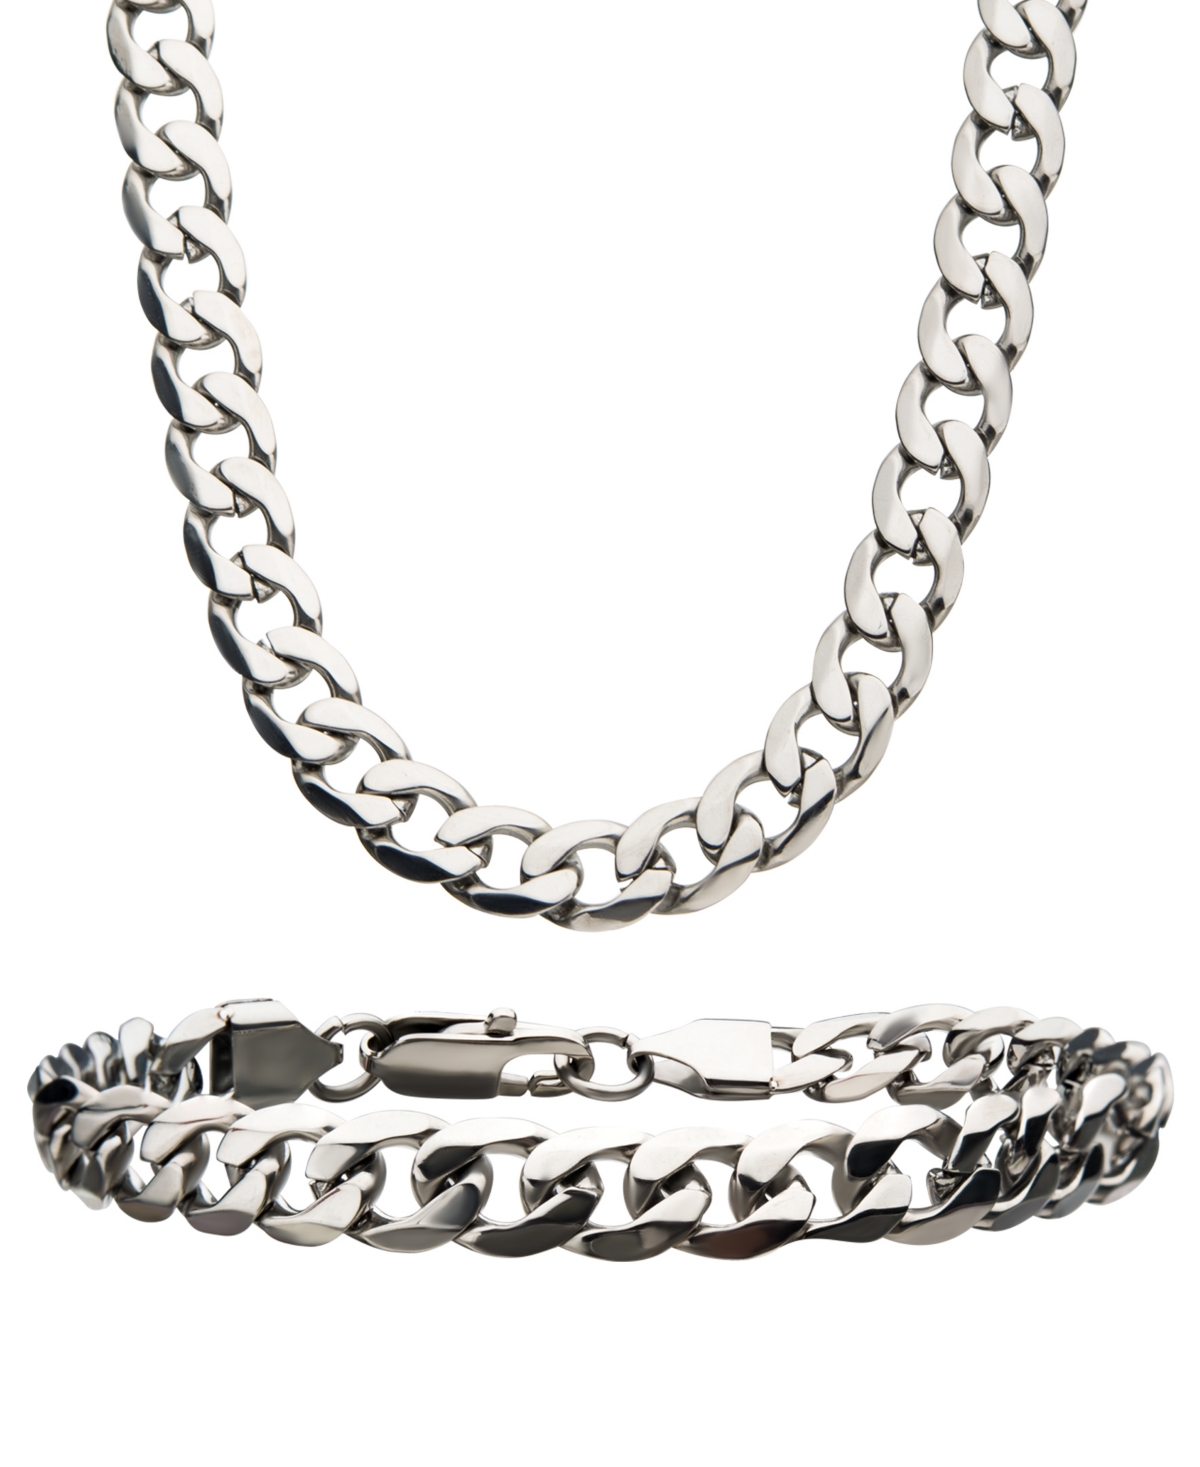 Curb Chain 8" Bracelet and 22" Necklace Set - Silver-Tone